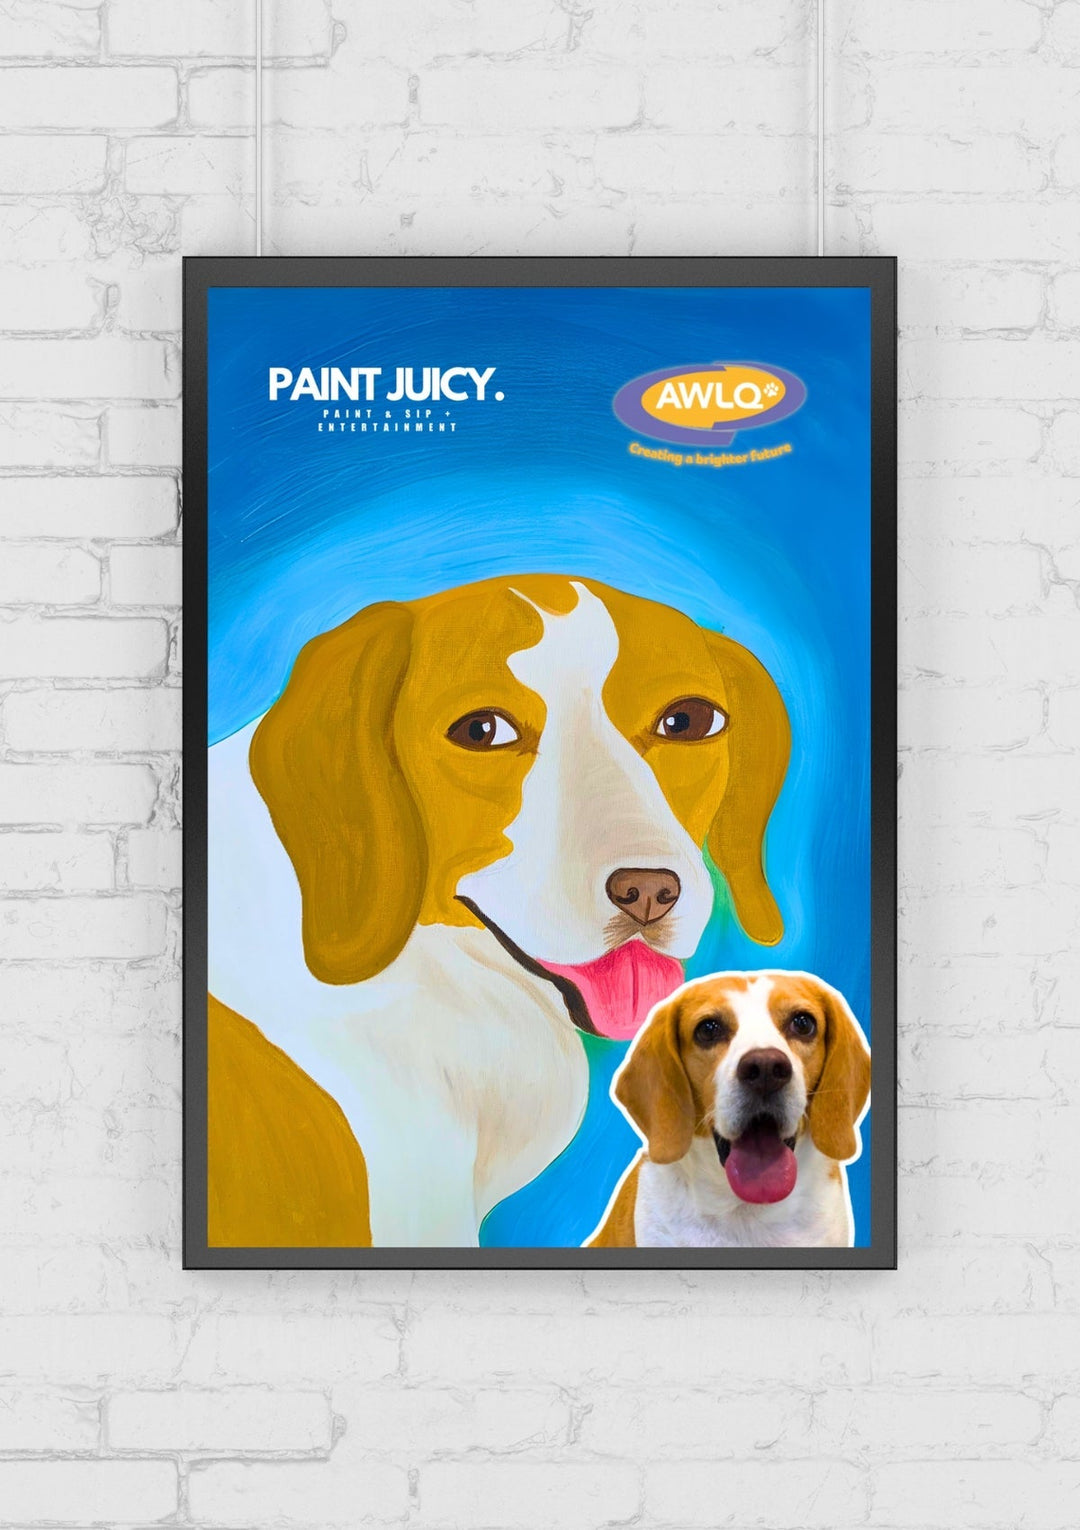 PAINT YOUR PET CHARITY EVENT - PAINT AND SIP 1ST SEPTEMBER - BURLEIGH HEADS GOLD COAST 12PM-Paint Juicy - Paint and Sip-Paint Juicy - Paint and Sip